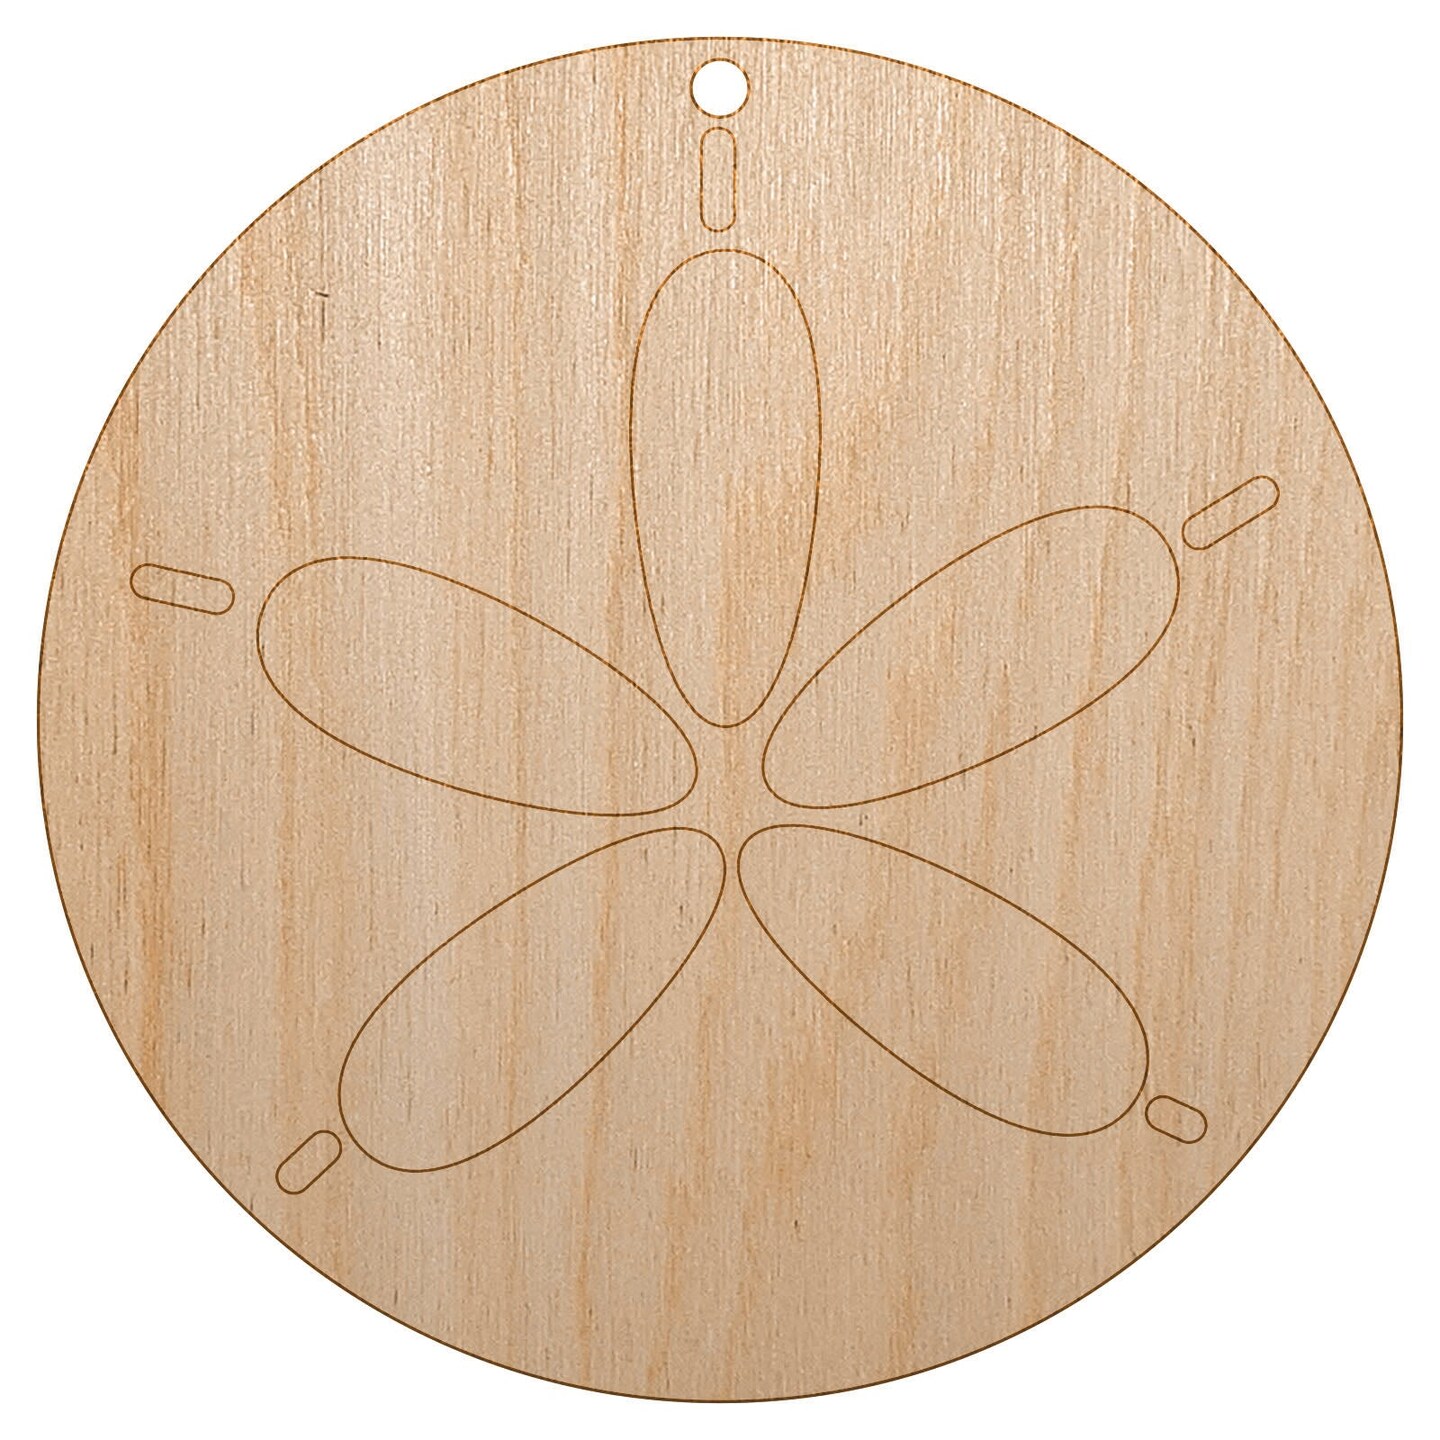 Sand Dollar Sea Urchin Ocean Beach Outline Unfinished Craft Wood Holiday Christmas Tree DIY Pre-Drilled Ornament